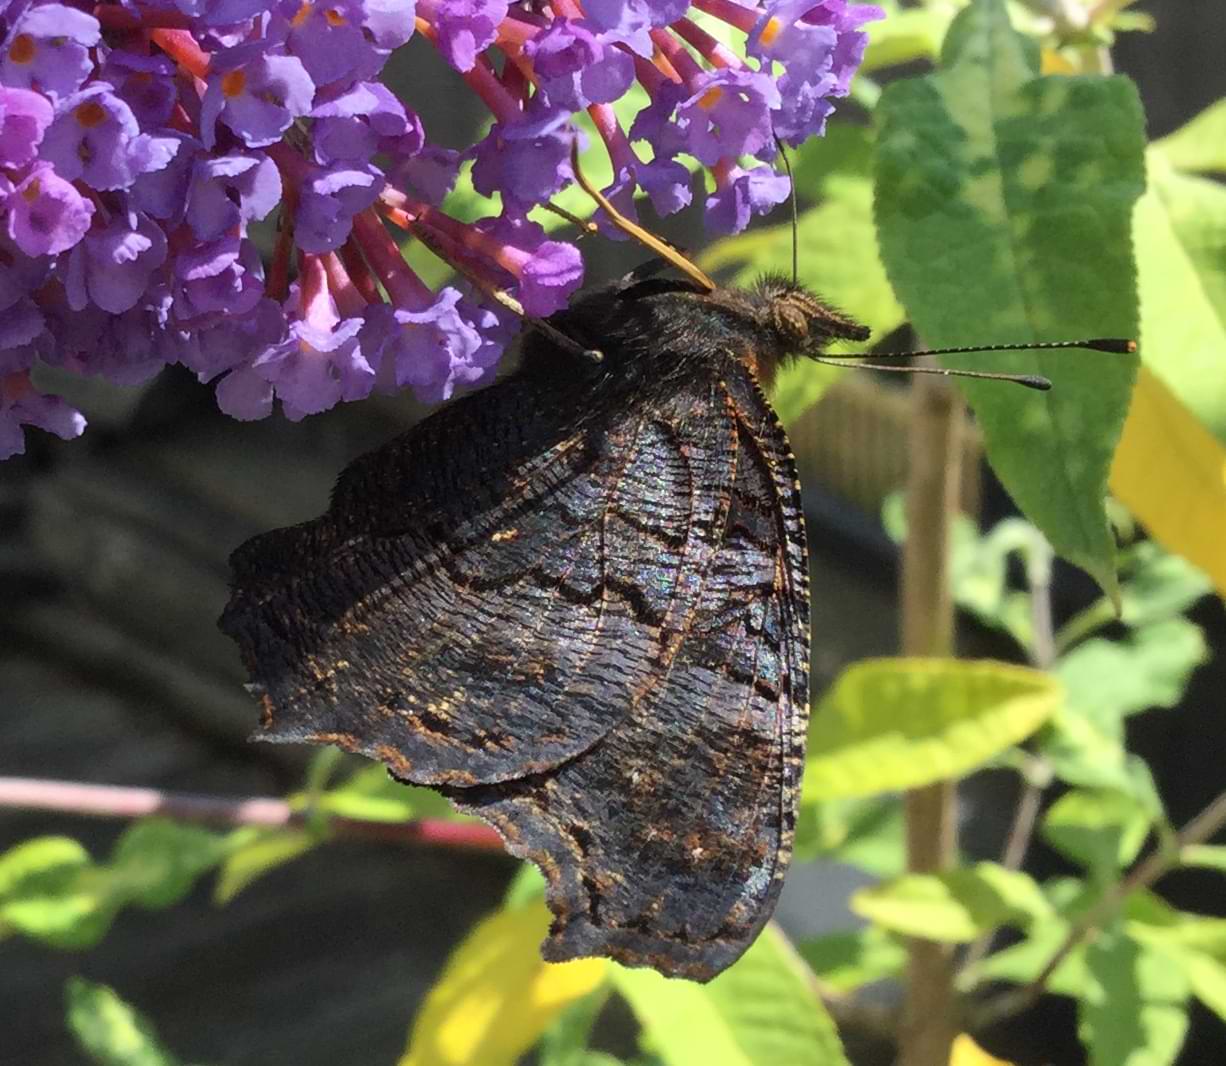 A butterfly feeding from some lilac-coloured flowers. The butterfly's wings are mostly black with a few patches of yellow, and has dark wavy lines running across them.